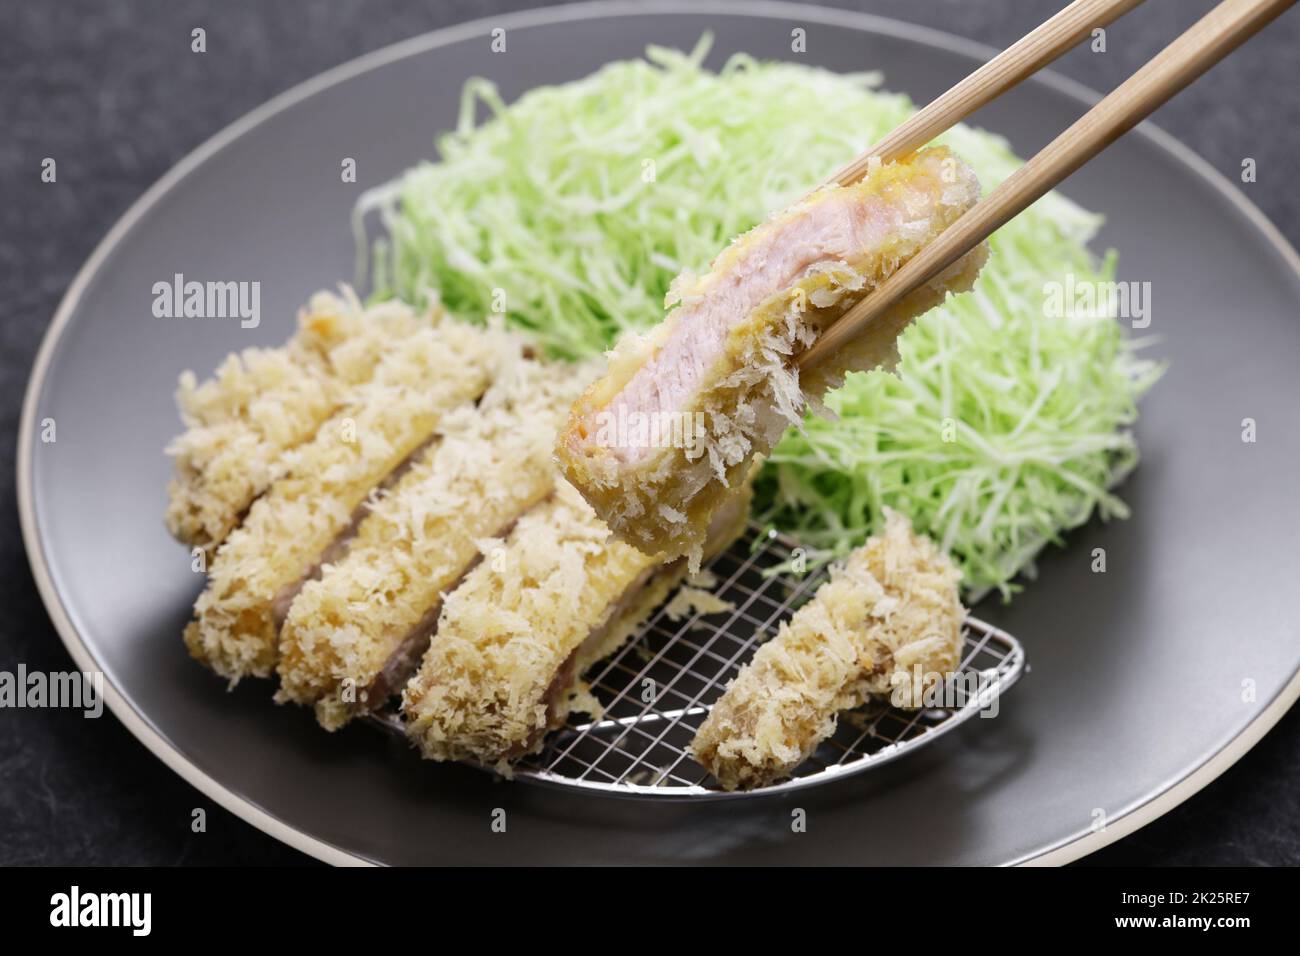 white Tonkatsu, pork loin cutlet (coated in bread crumbs and deep fried at a low temperature), Japanese cuisine Stock Photo